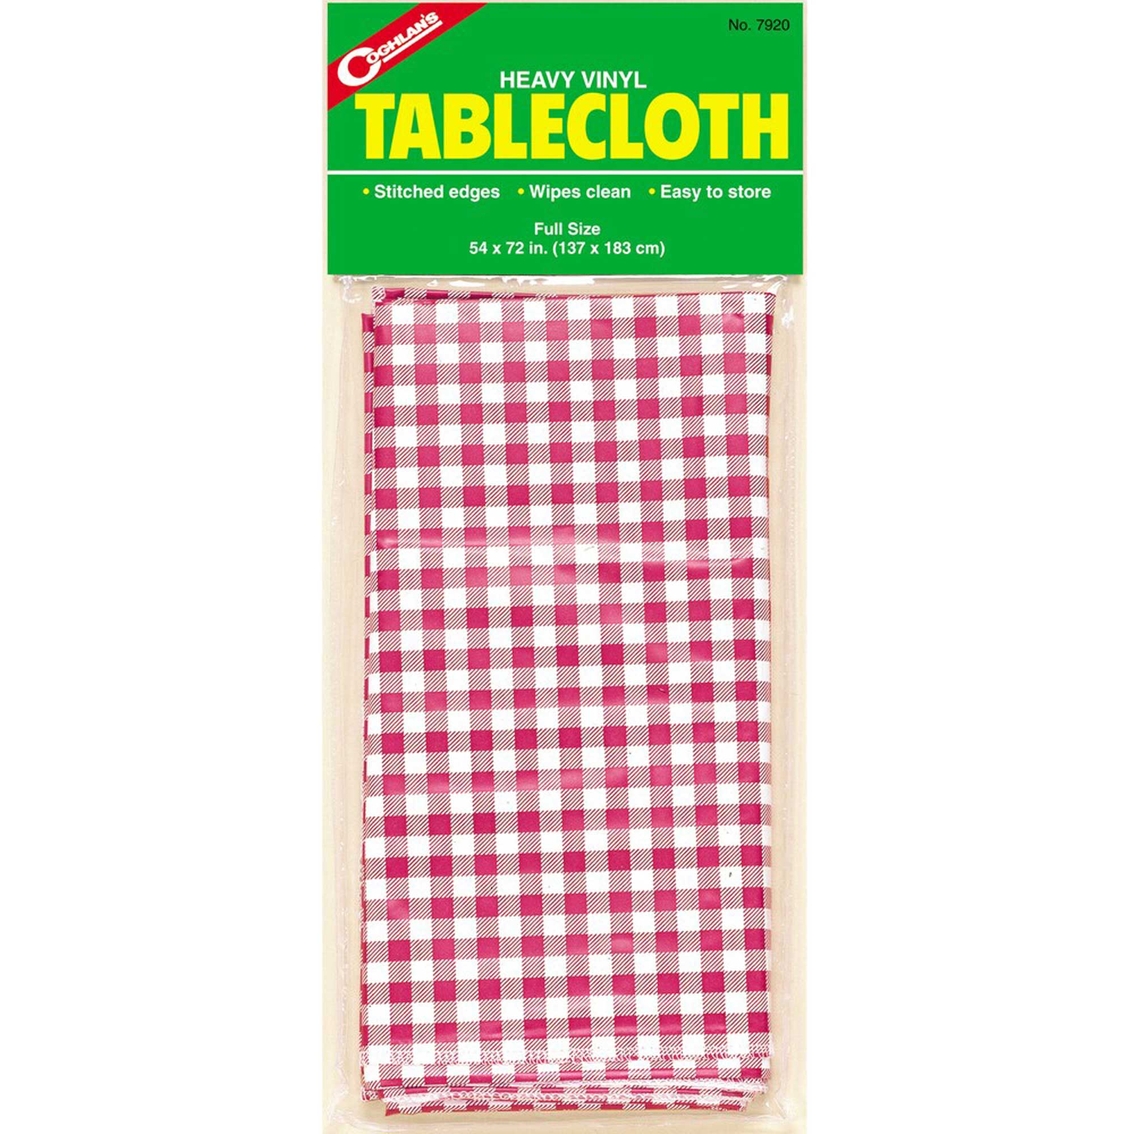 Coghlans 54 x 72 in. Vinyl Tablecloth - Image 3 of 3